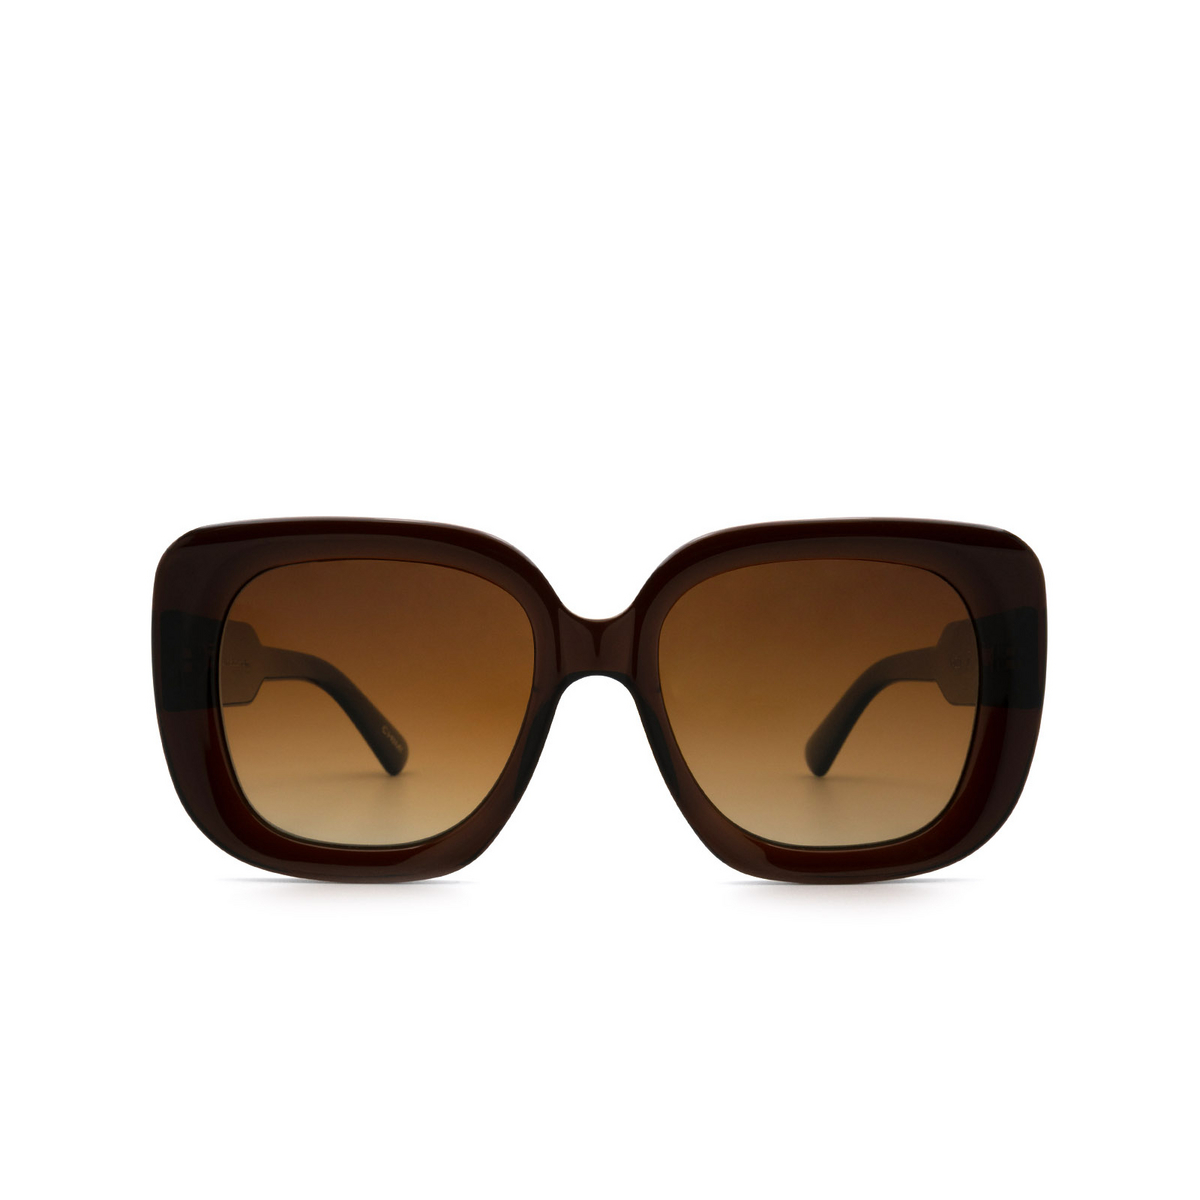 Chimi 10 (2021) Sunglasses BROWN - front view